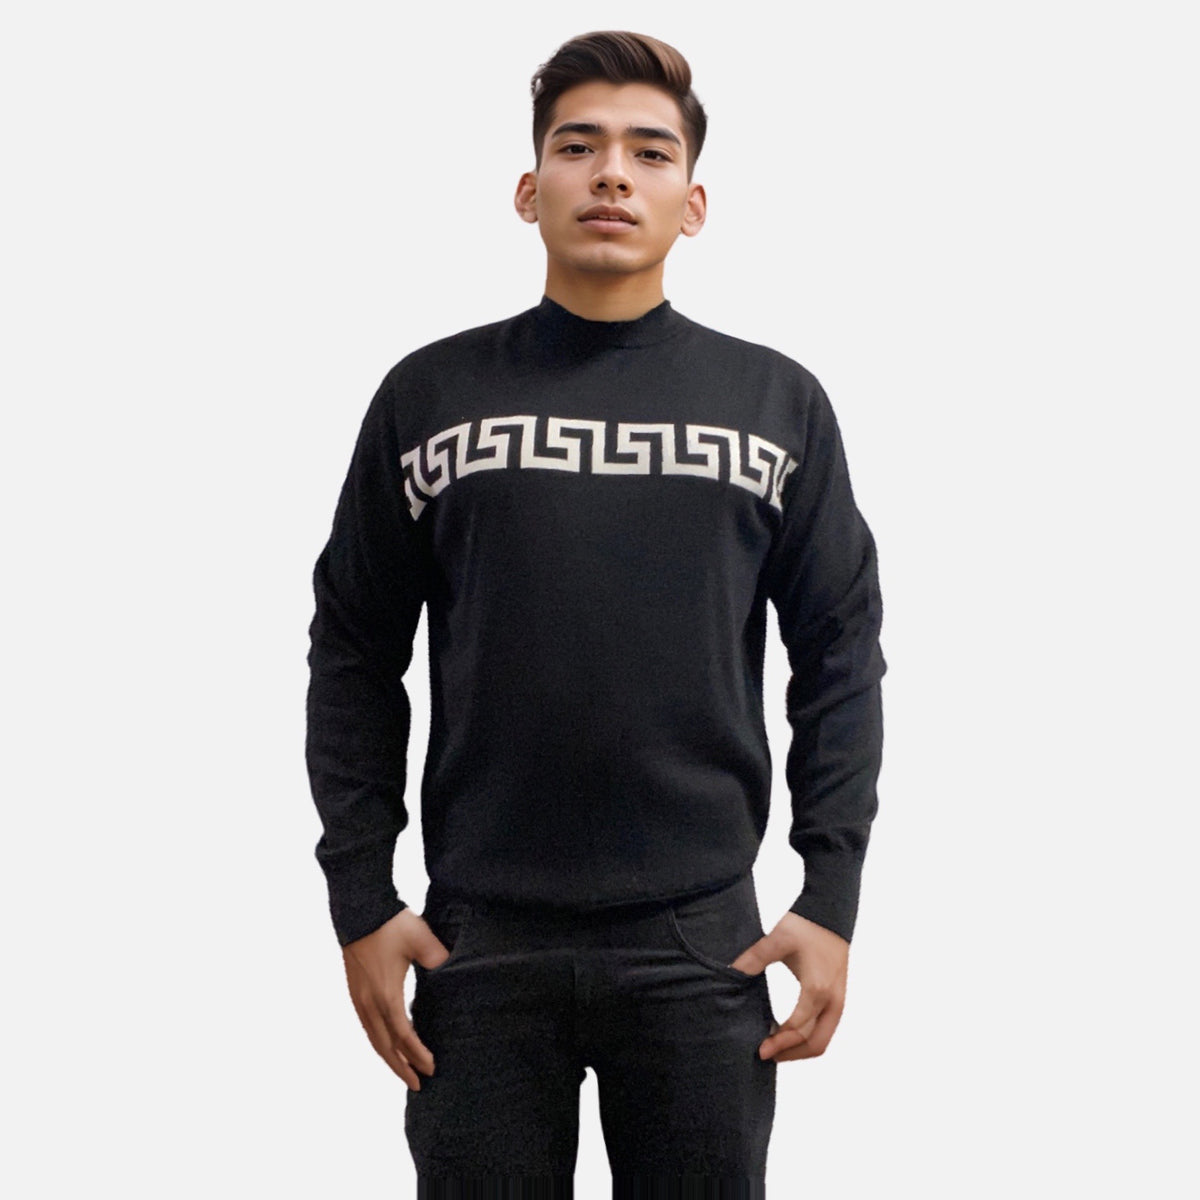 Mens Black Mock Neck sweater with White Pattern